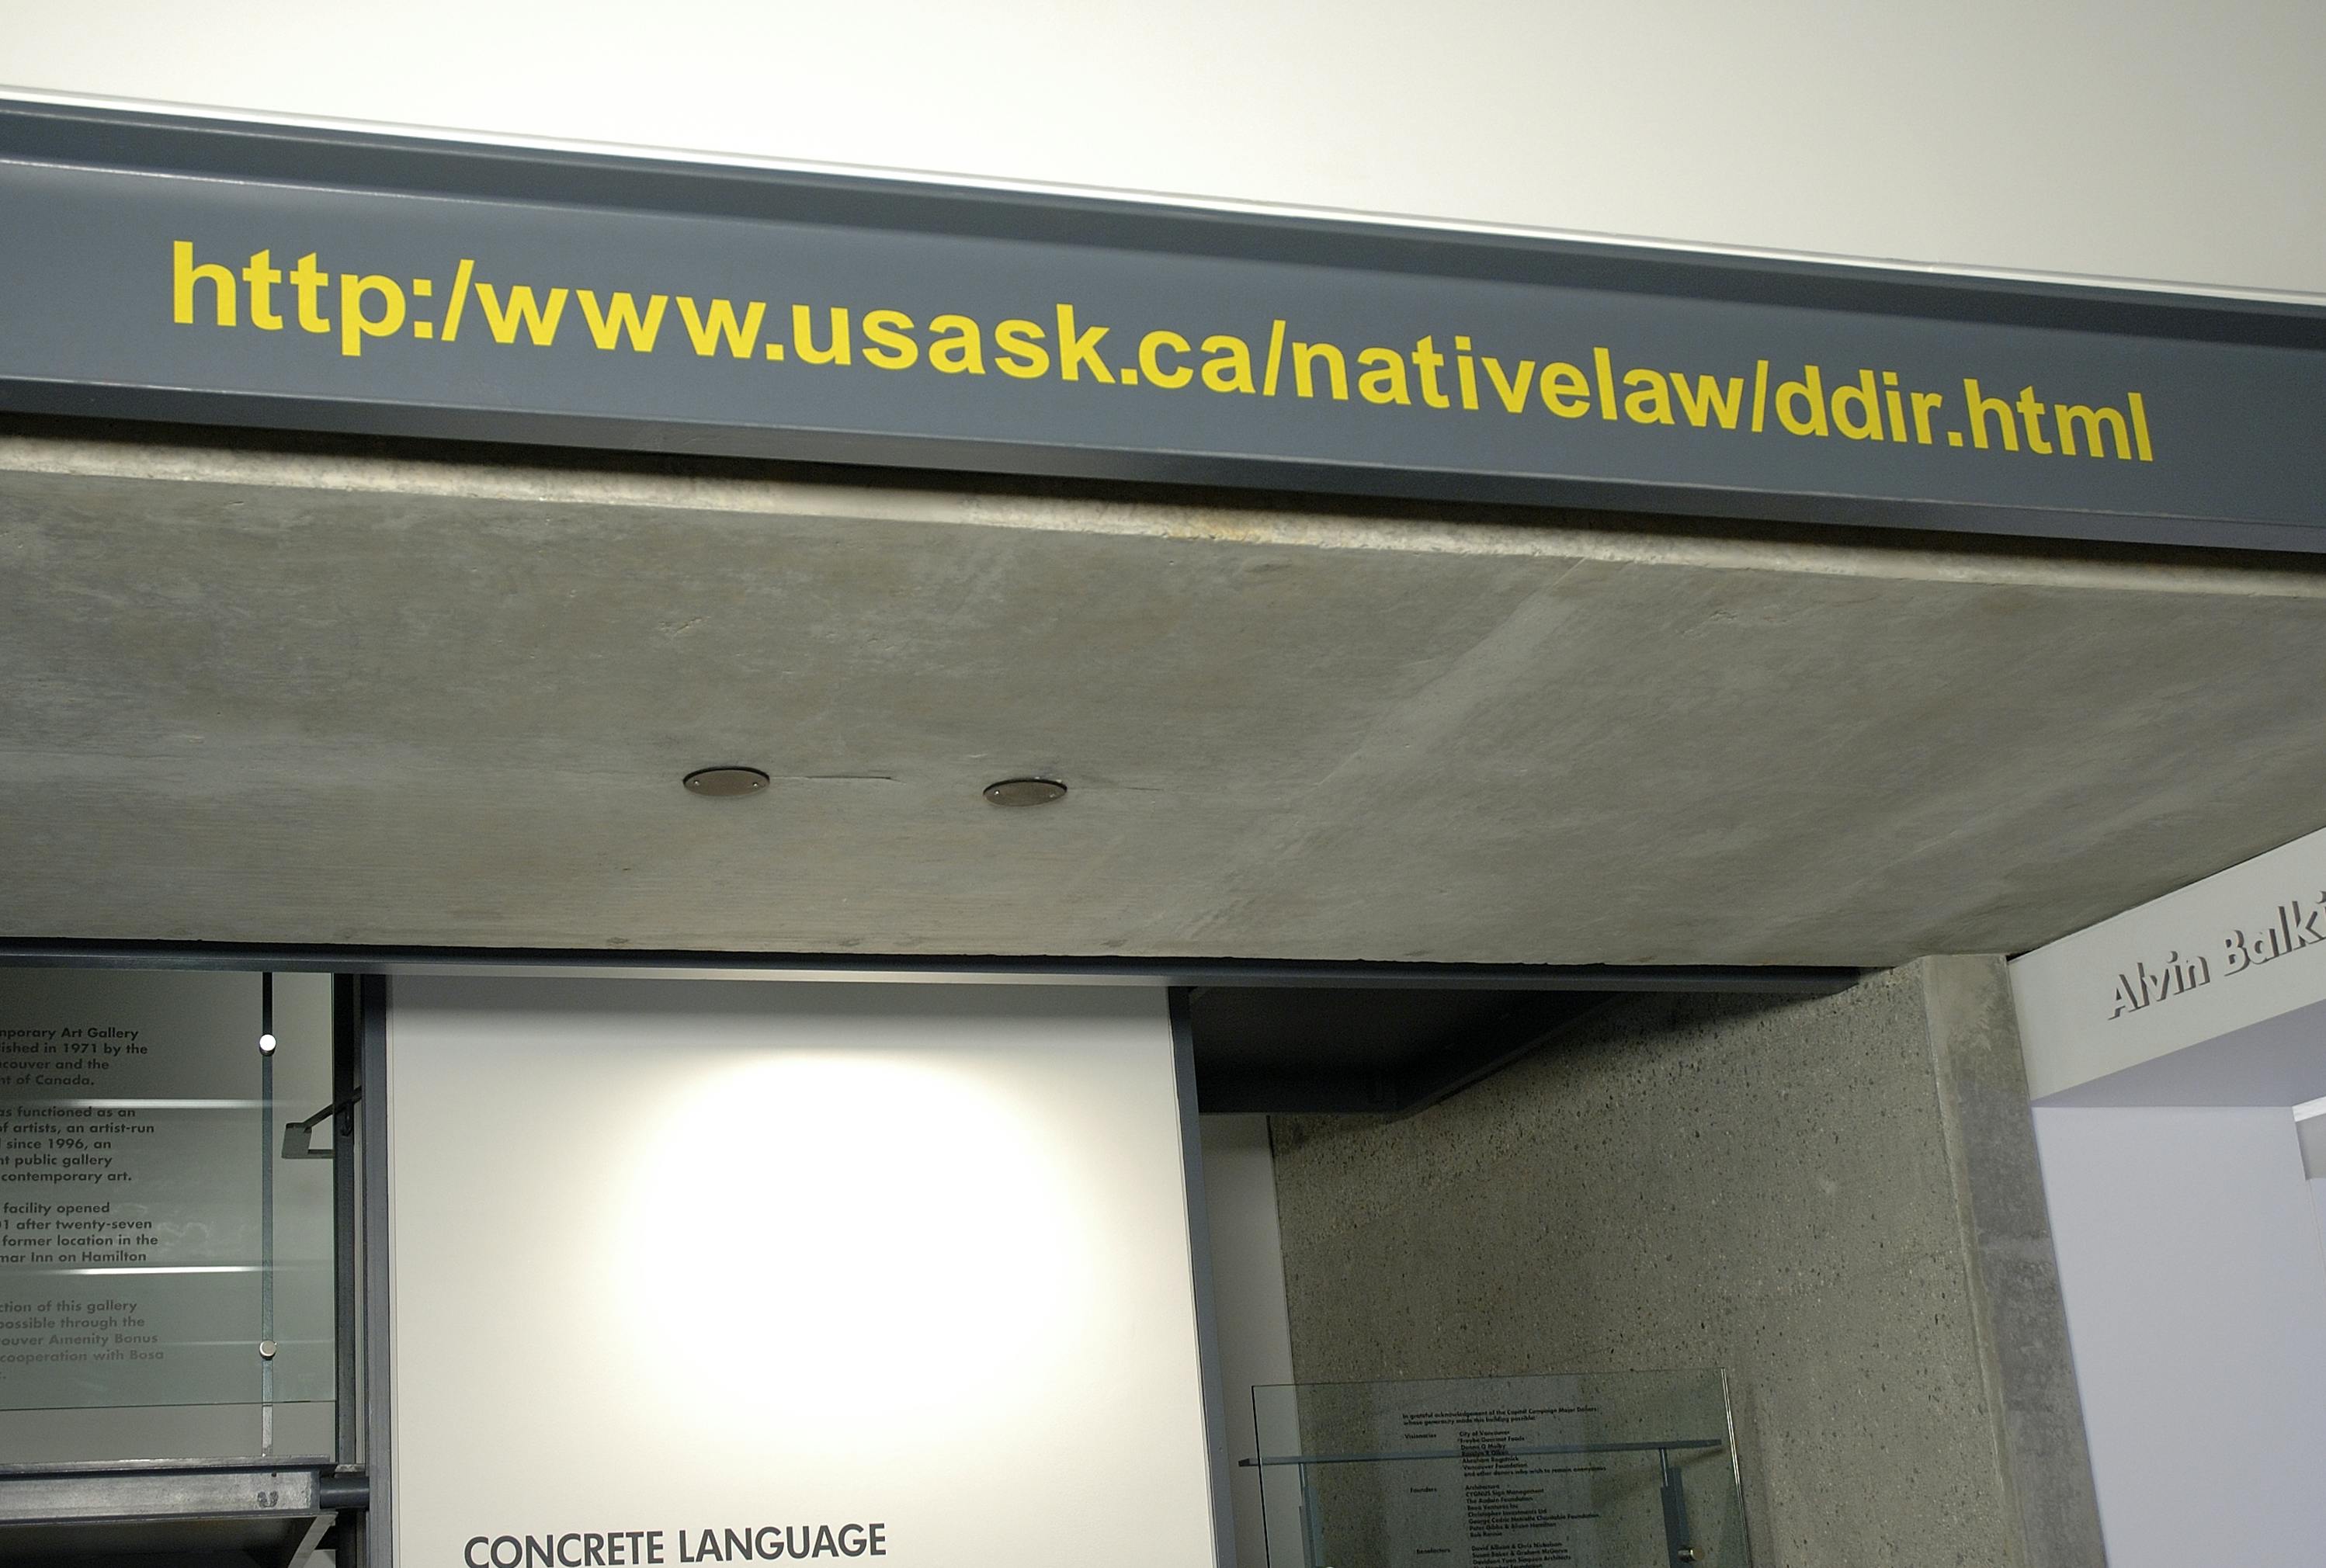 In CAG’s lobby, a URL is printed on the grey steel beam that is attached to the wall. The URL is http://www.usask.ca/nativelaw/ddir.html and it appears in yellow letters. 